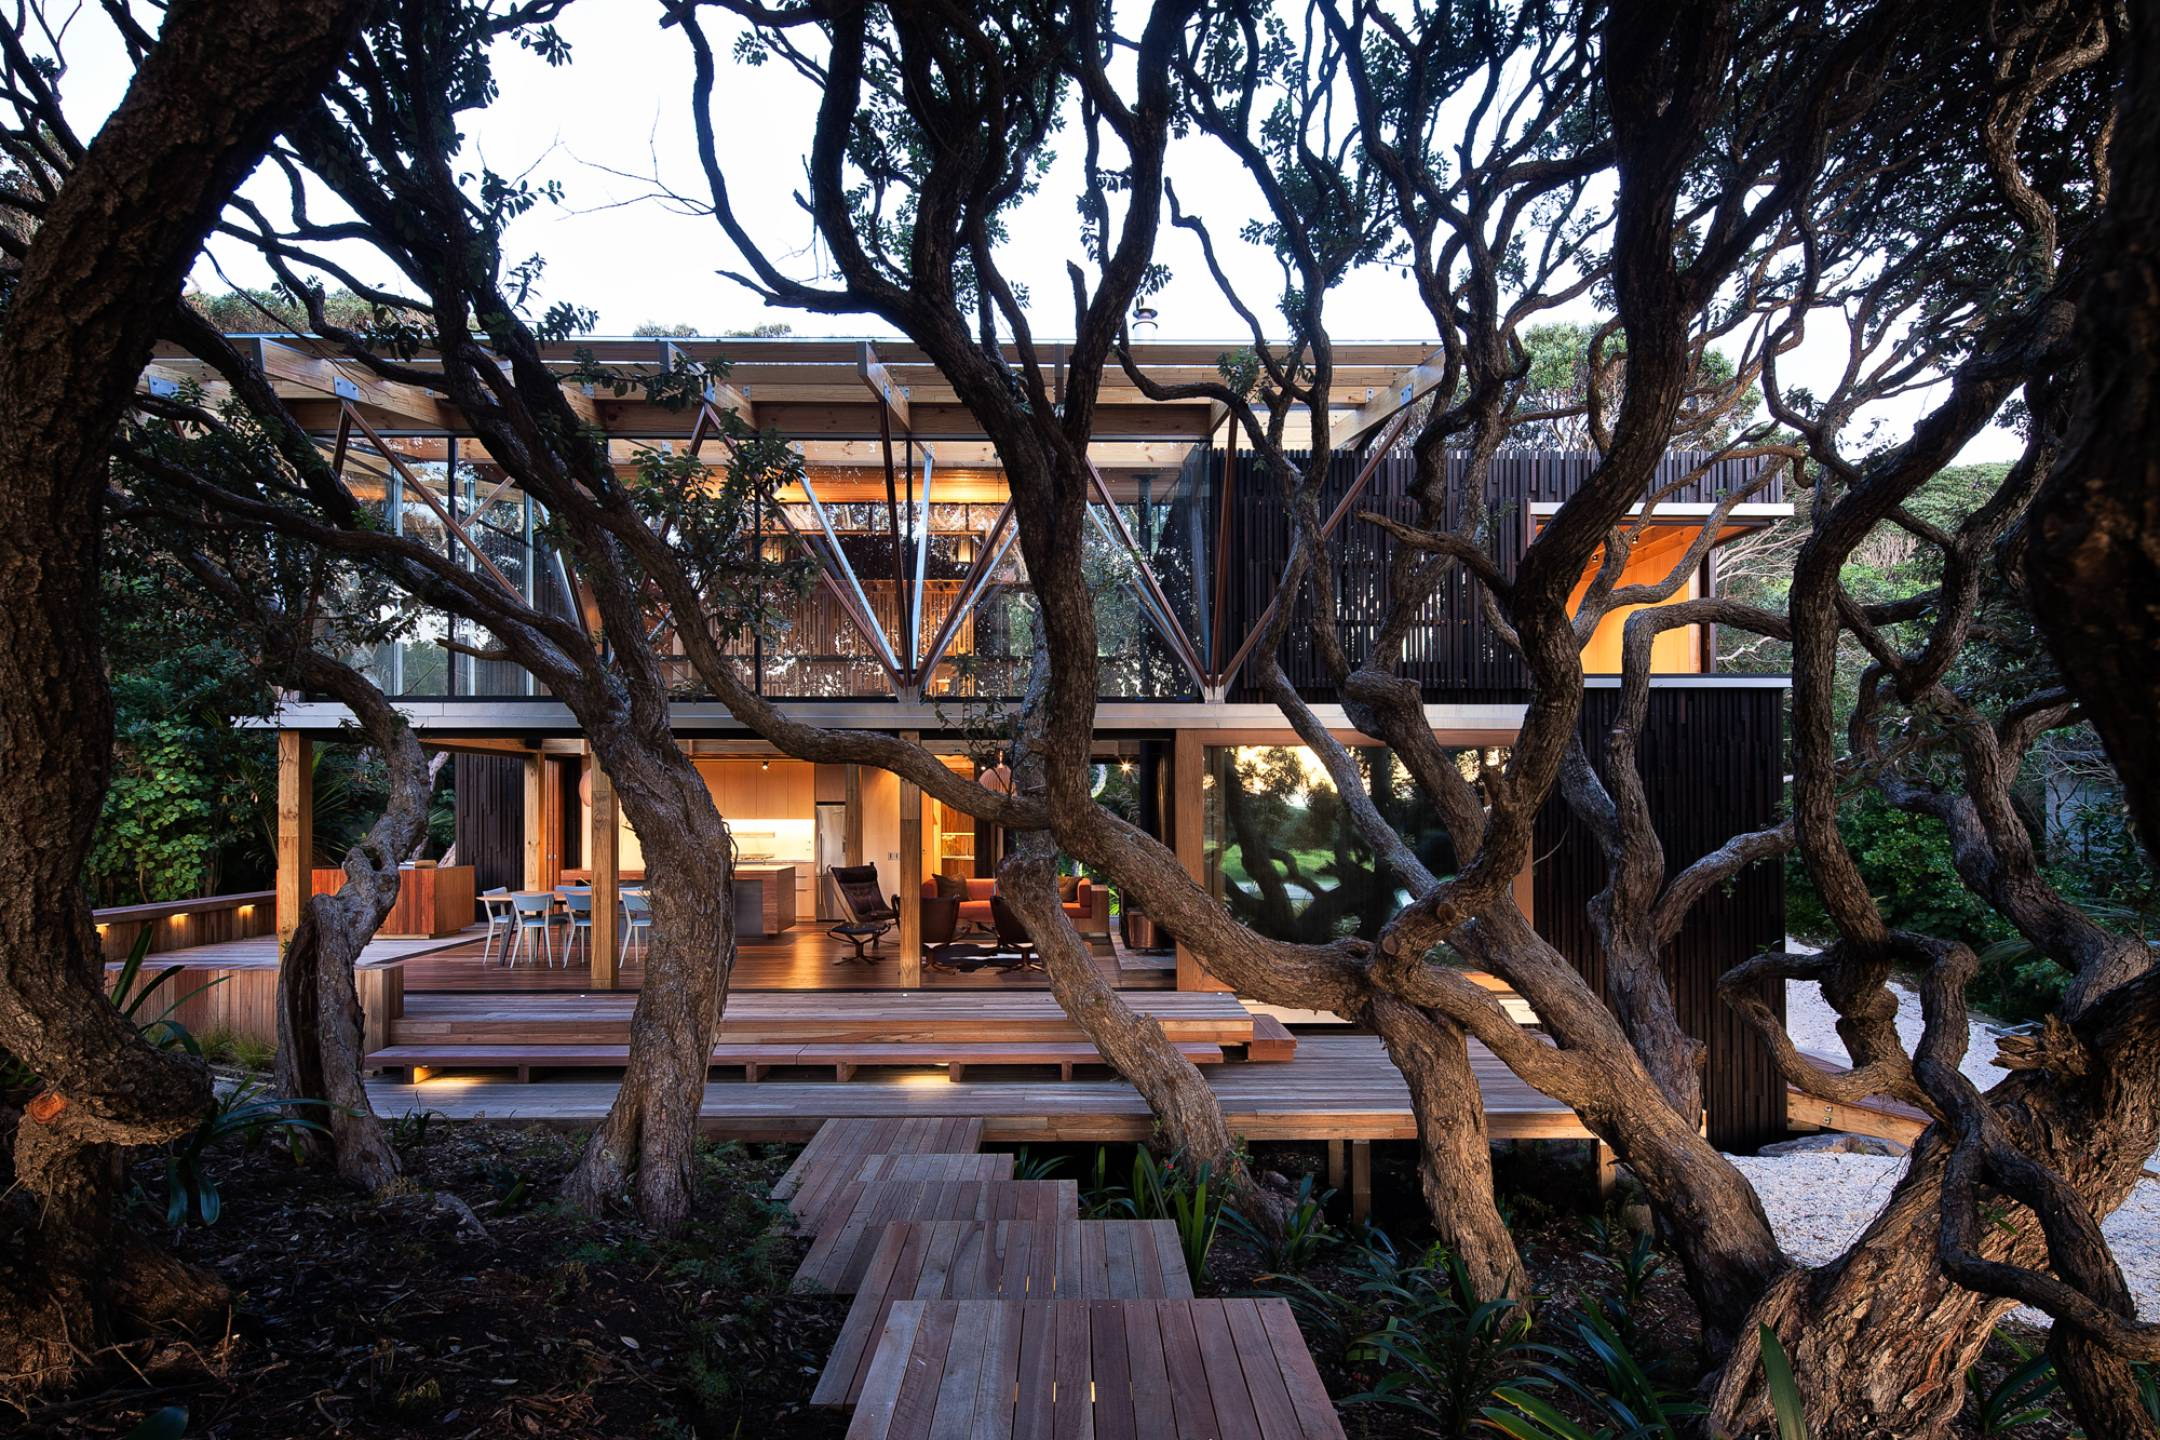 Under Pohutukawa Beach House by Herbst Architects